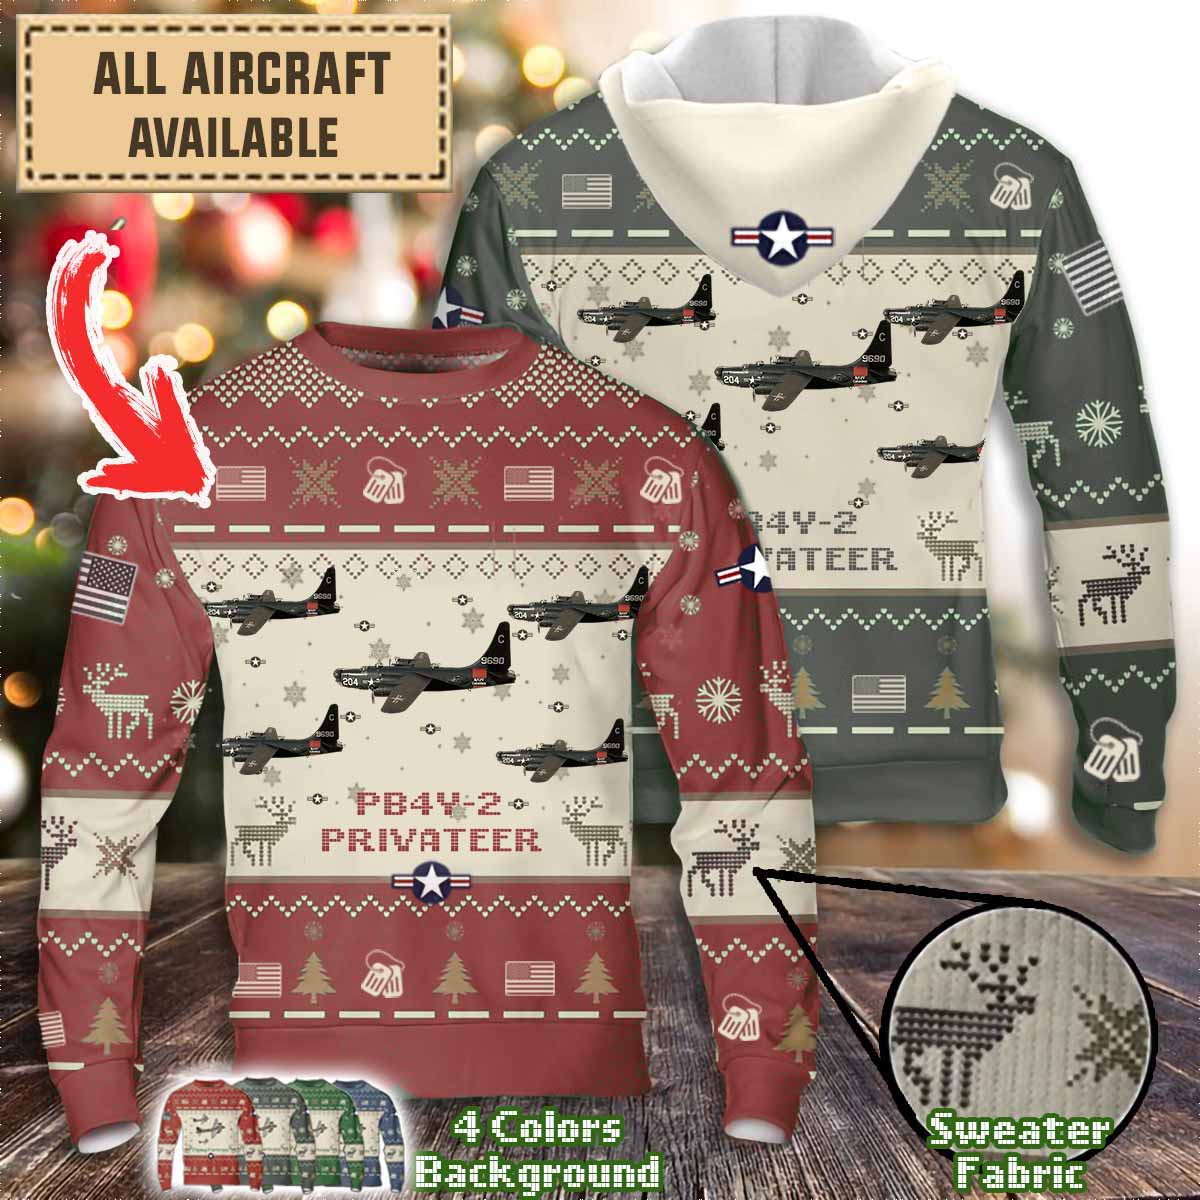 navy pb4y 2 privateer pb4y2aircraft sweater oie1a